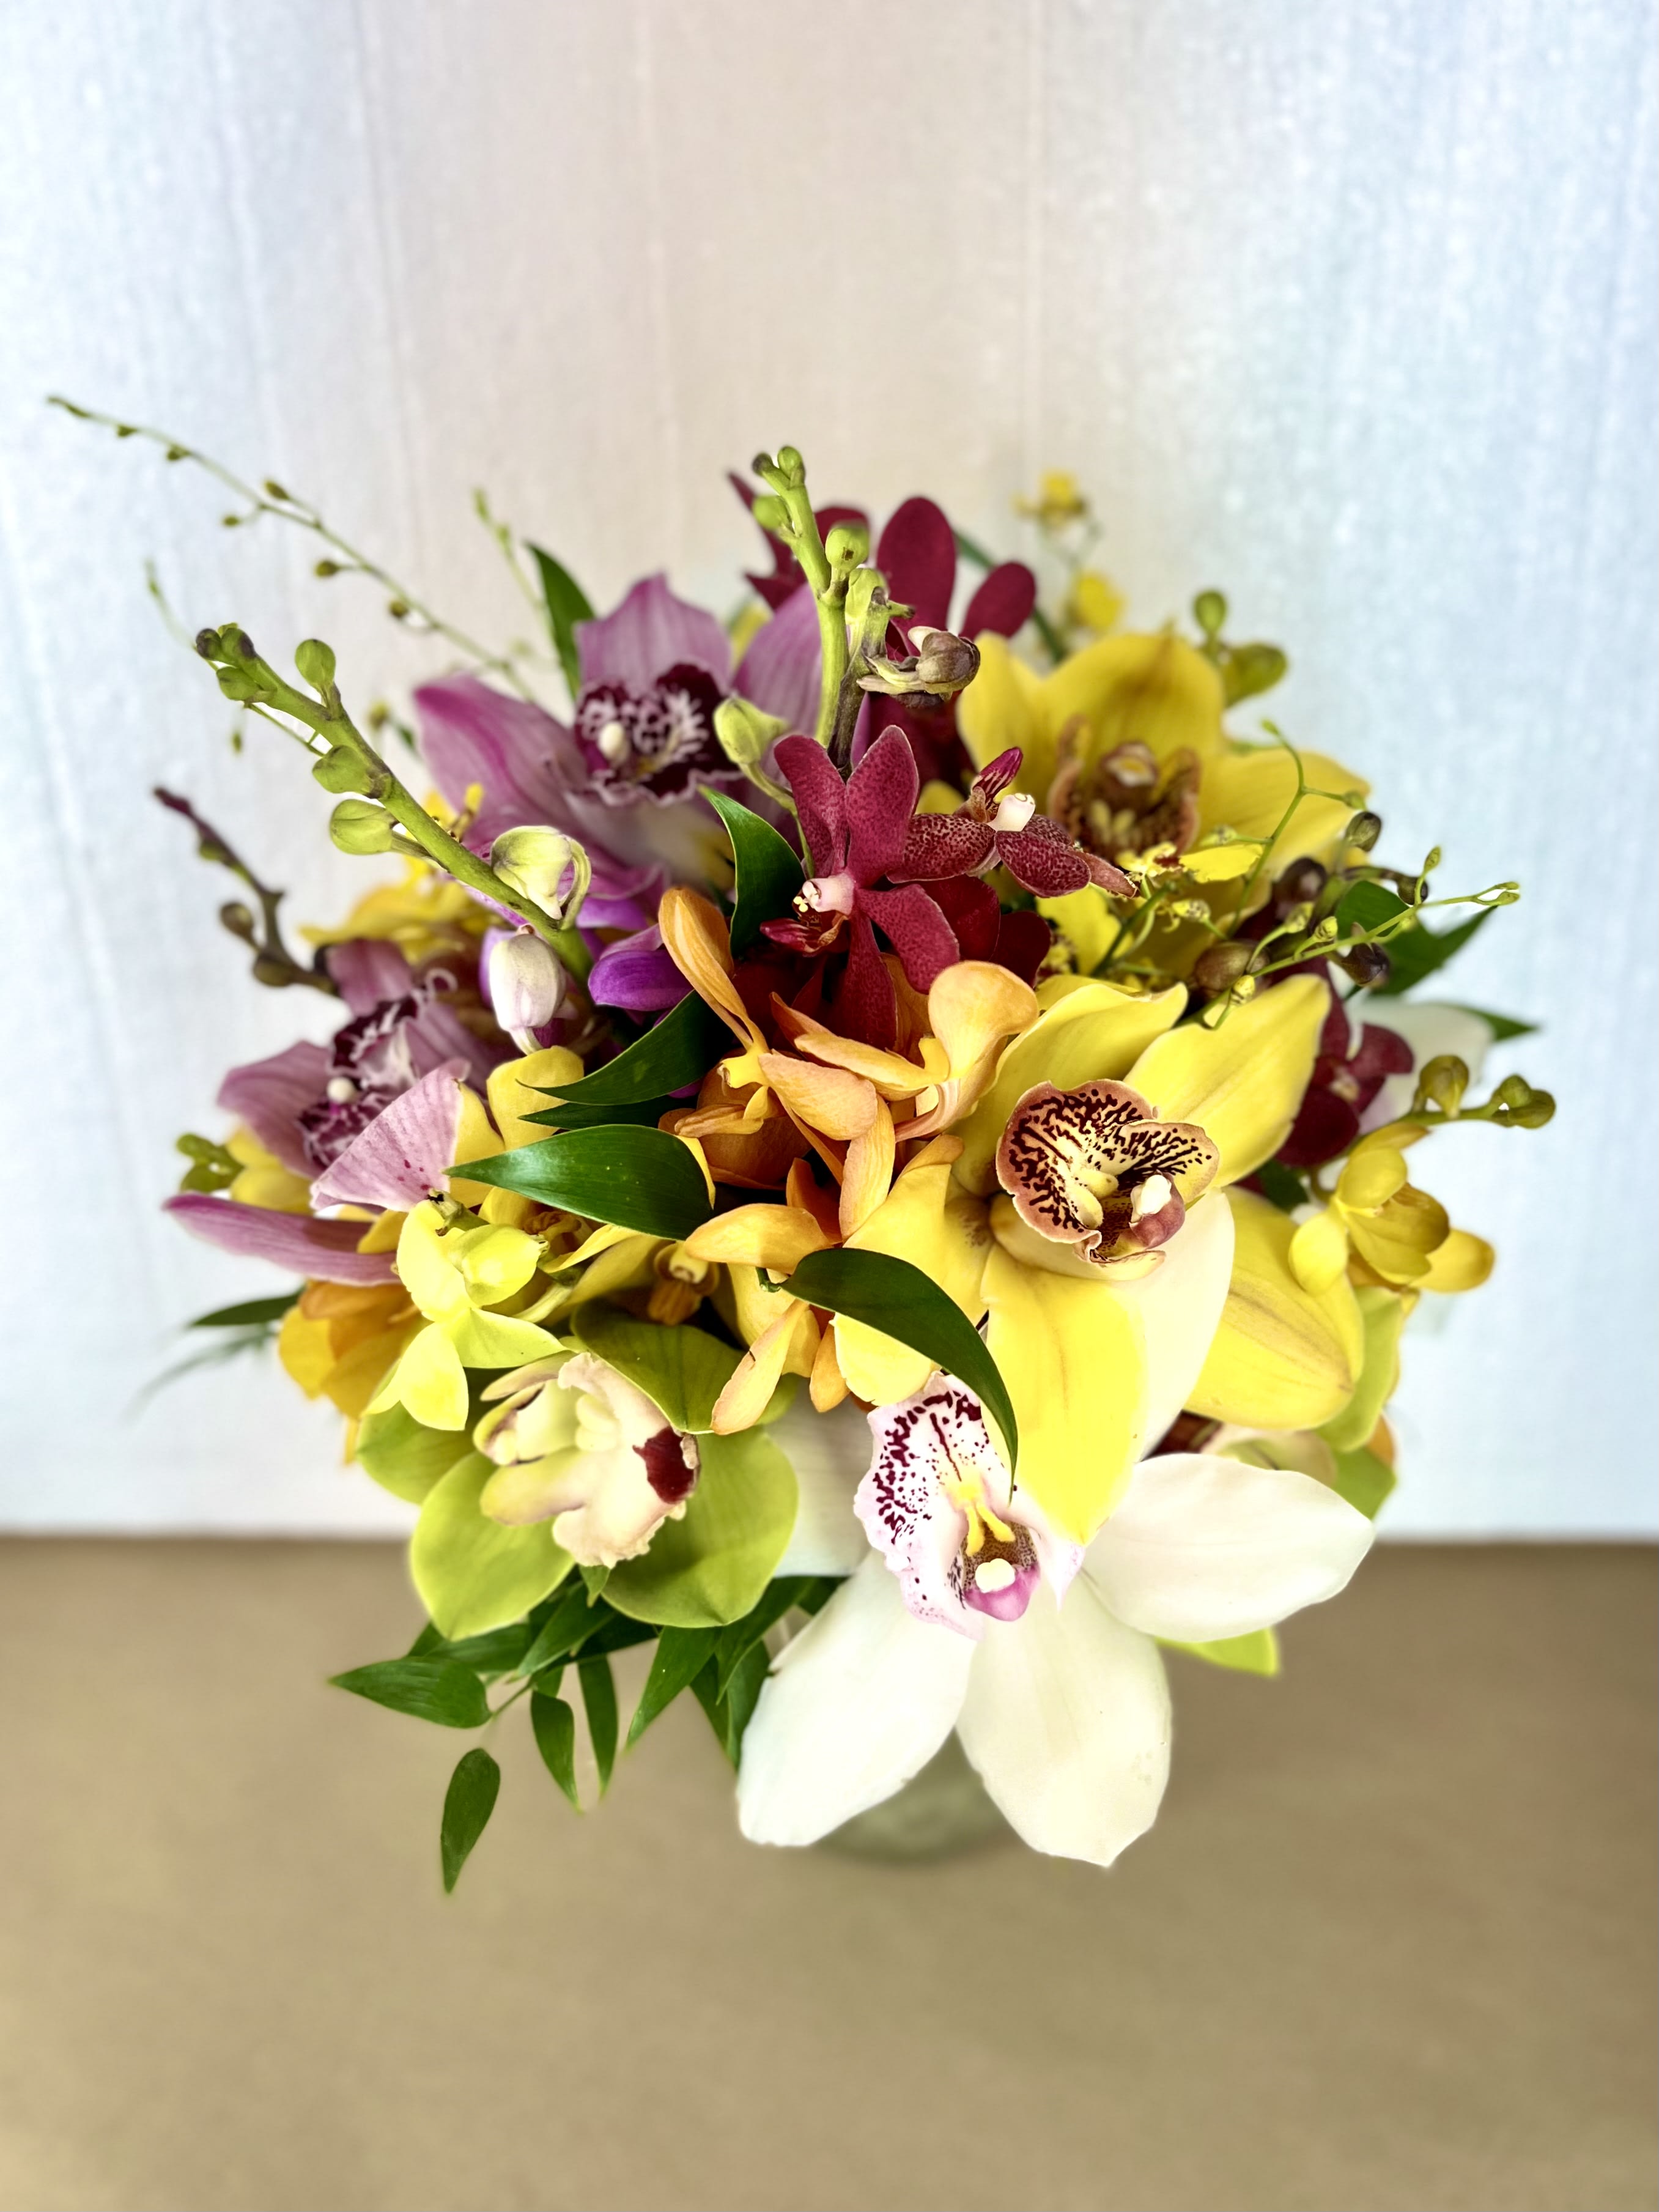 TROPICAL ORCHID BOUQUET  - 7&quot; - 8&quot; Beautiful Hand-held bridal bouquet made with cymbidium and makara orchids and ruscus greens.  *** Please list up to 3 colors in the &quot;Special Instructions&quot; section upon checking out. 